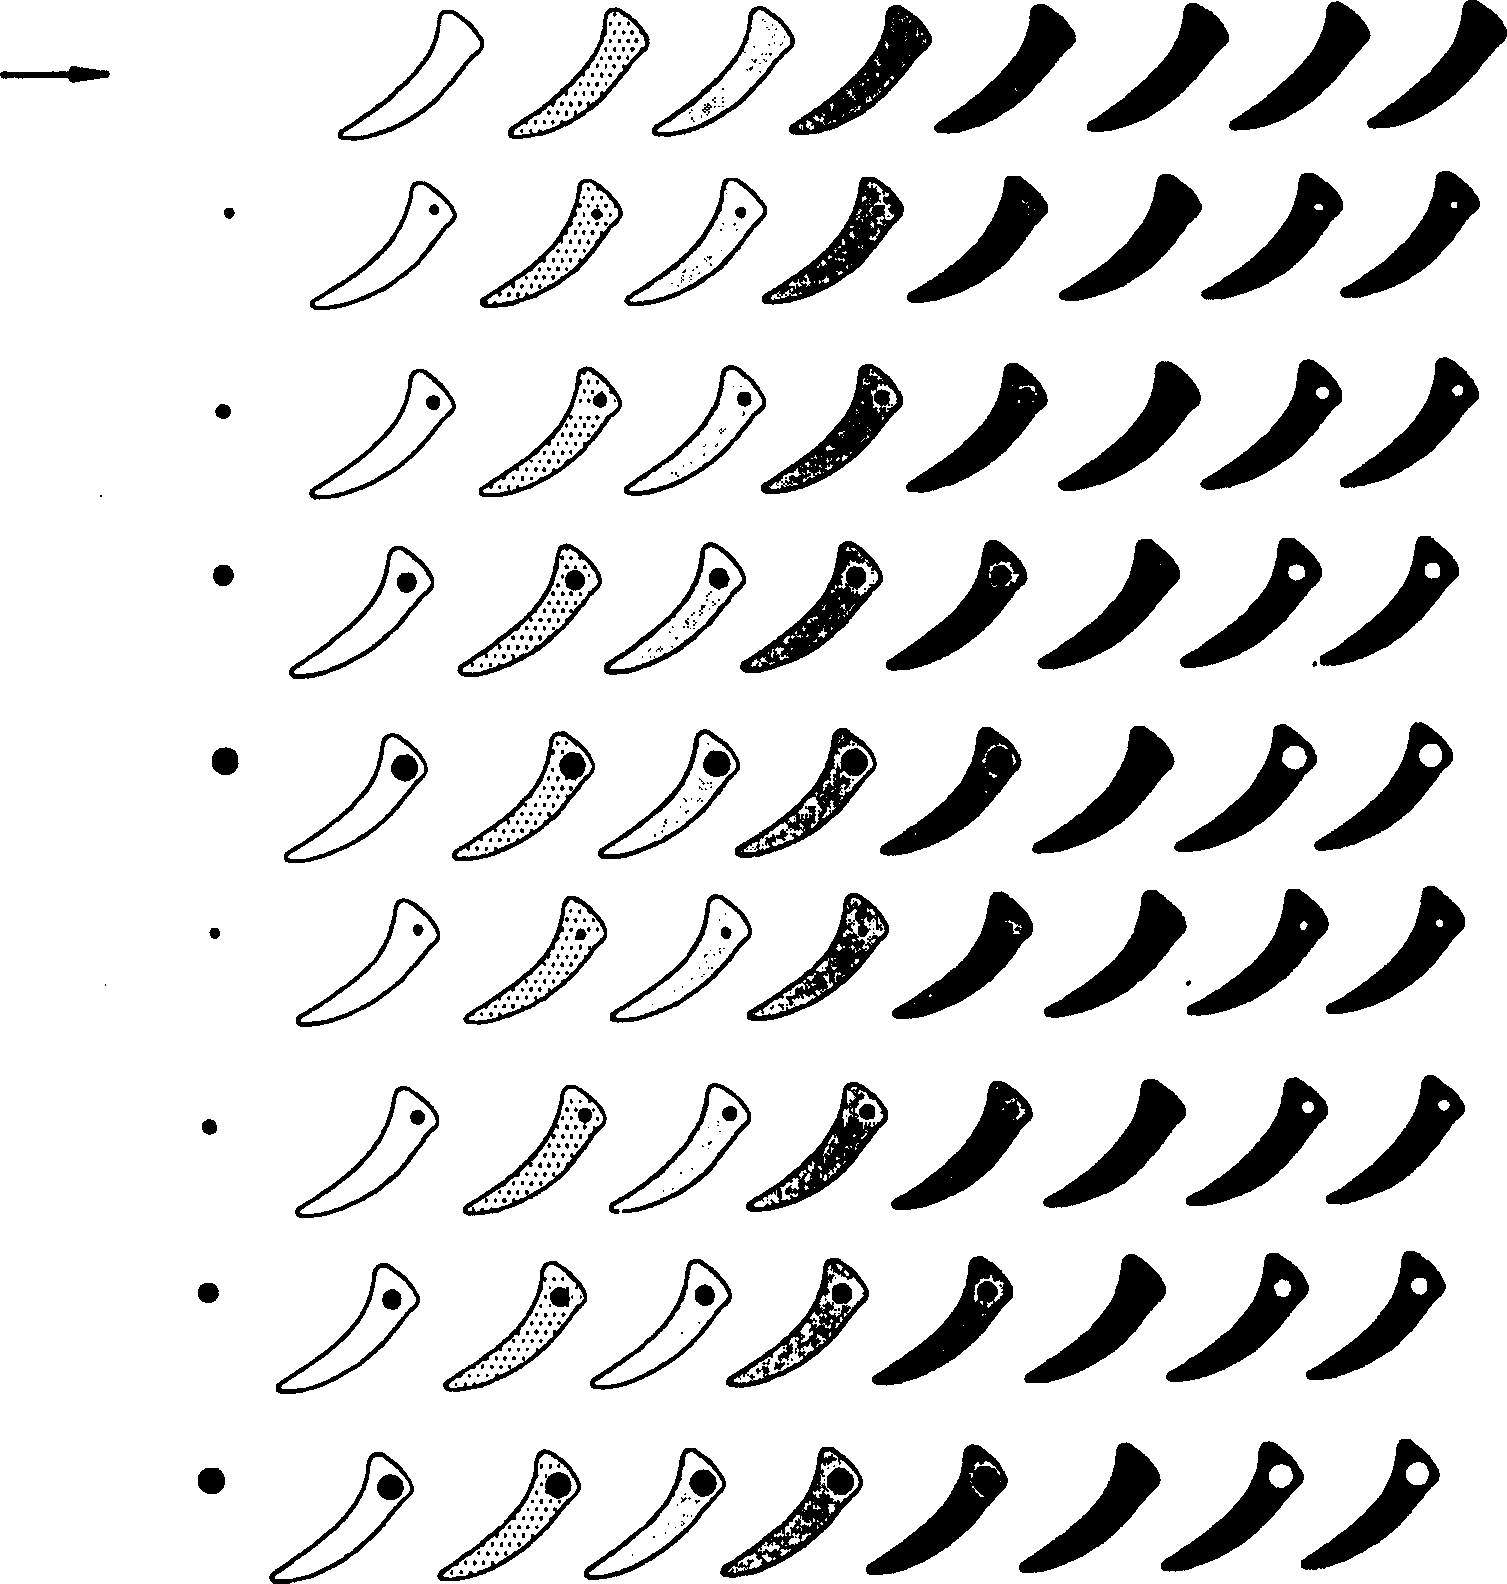 Computer character form, its stroke order and radical displaying method for Chinese character teaching